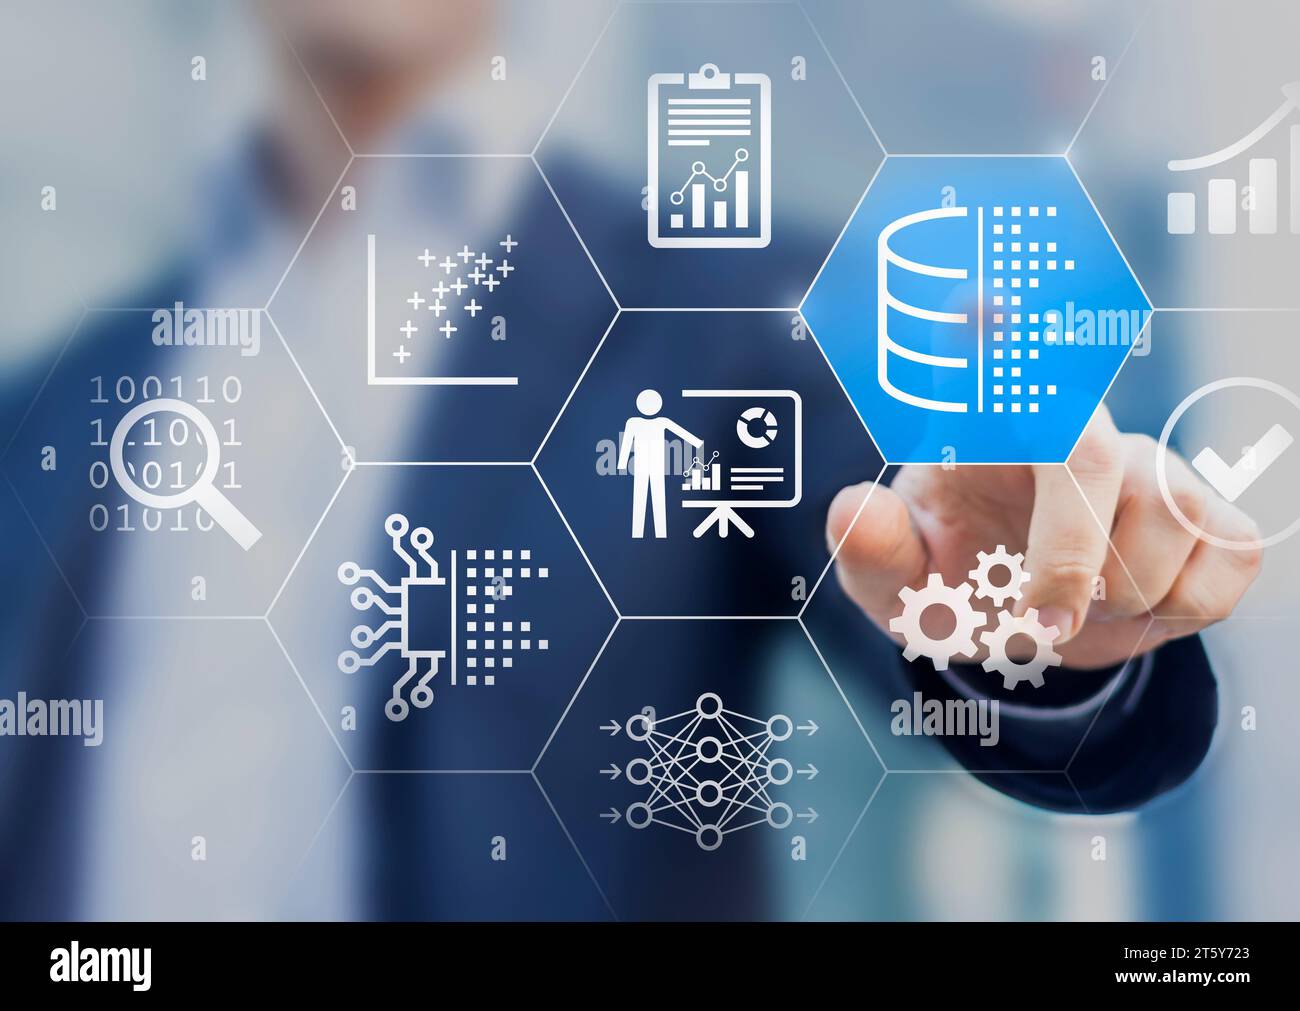 Data analytics, big data and AI concept. Person touching icons about database, data engineering, computing, analyzing, machine learning, neural networ Stock Photo